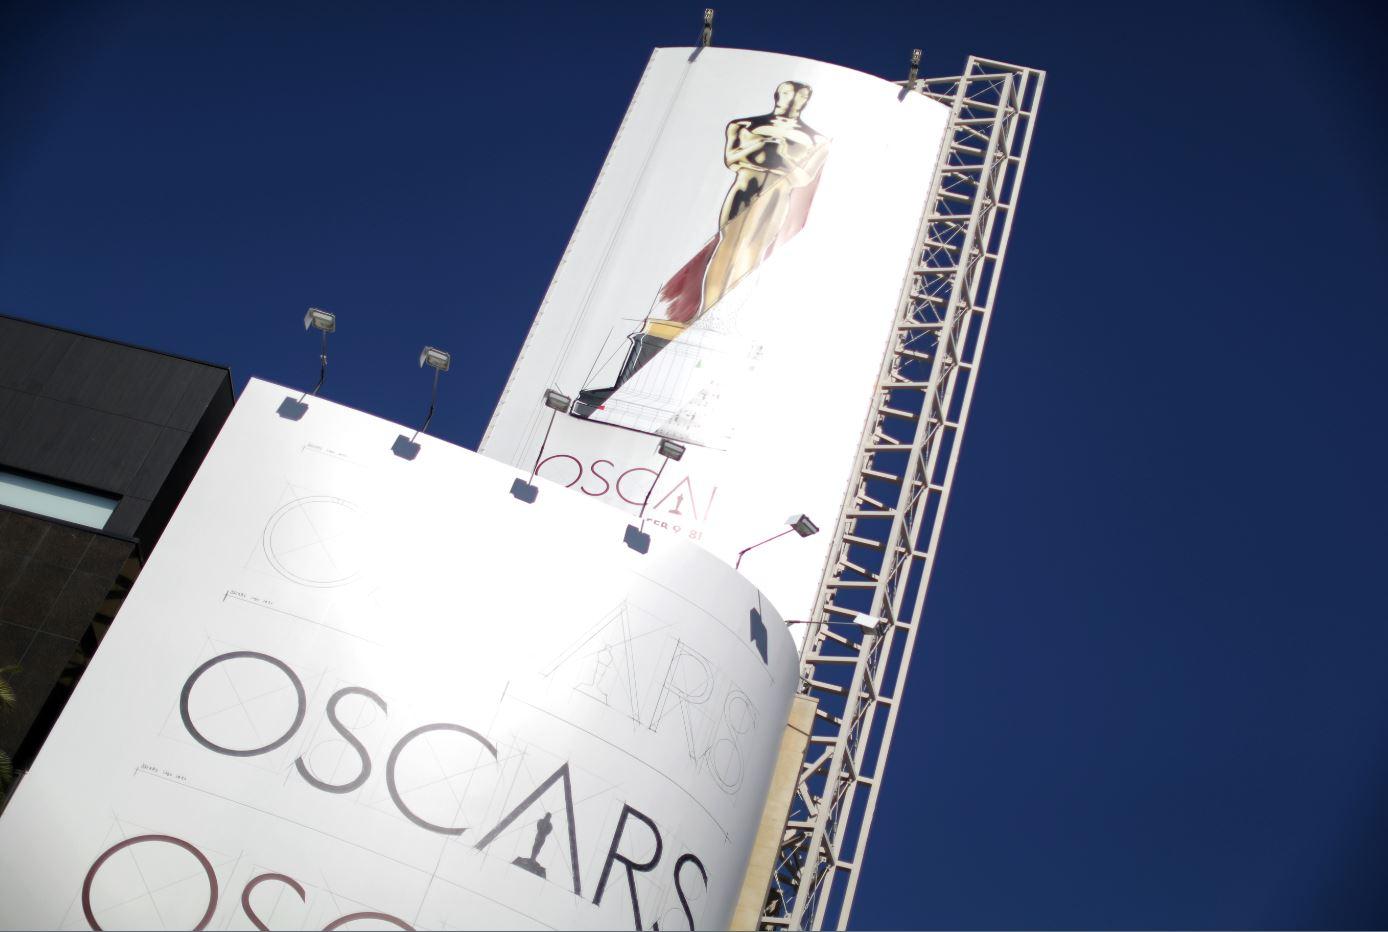 Nominations for the 95th Academy Awards GMA News Online